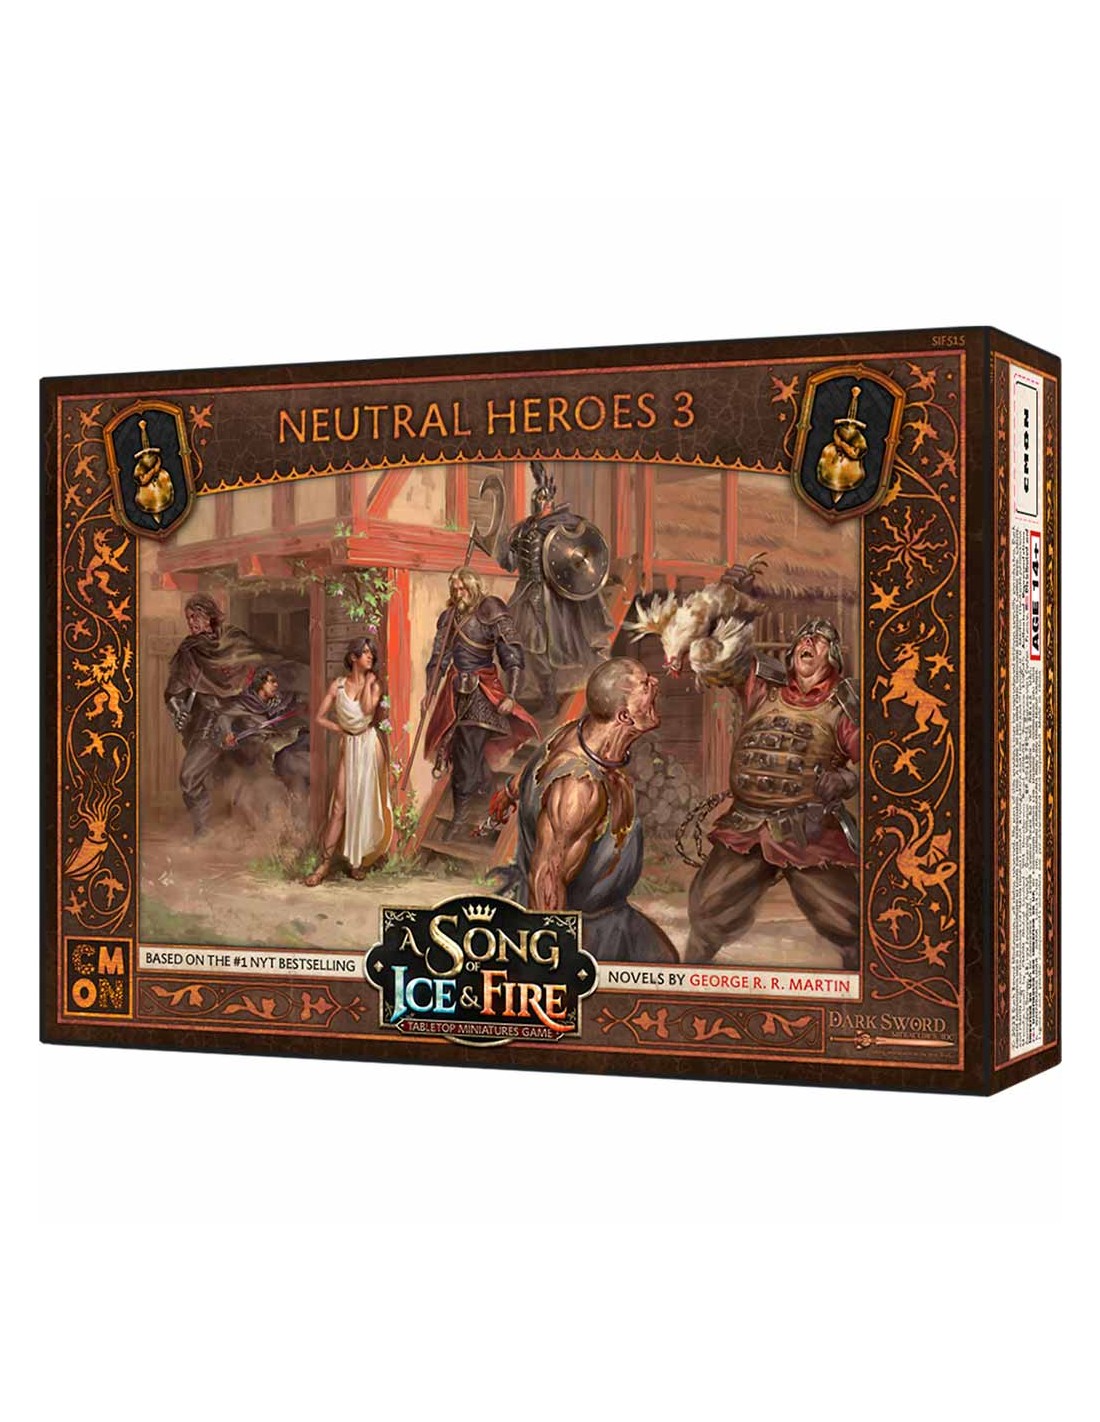 A Song of Ice & Fire: Neutral Heroes 3 (Multilingual)